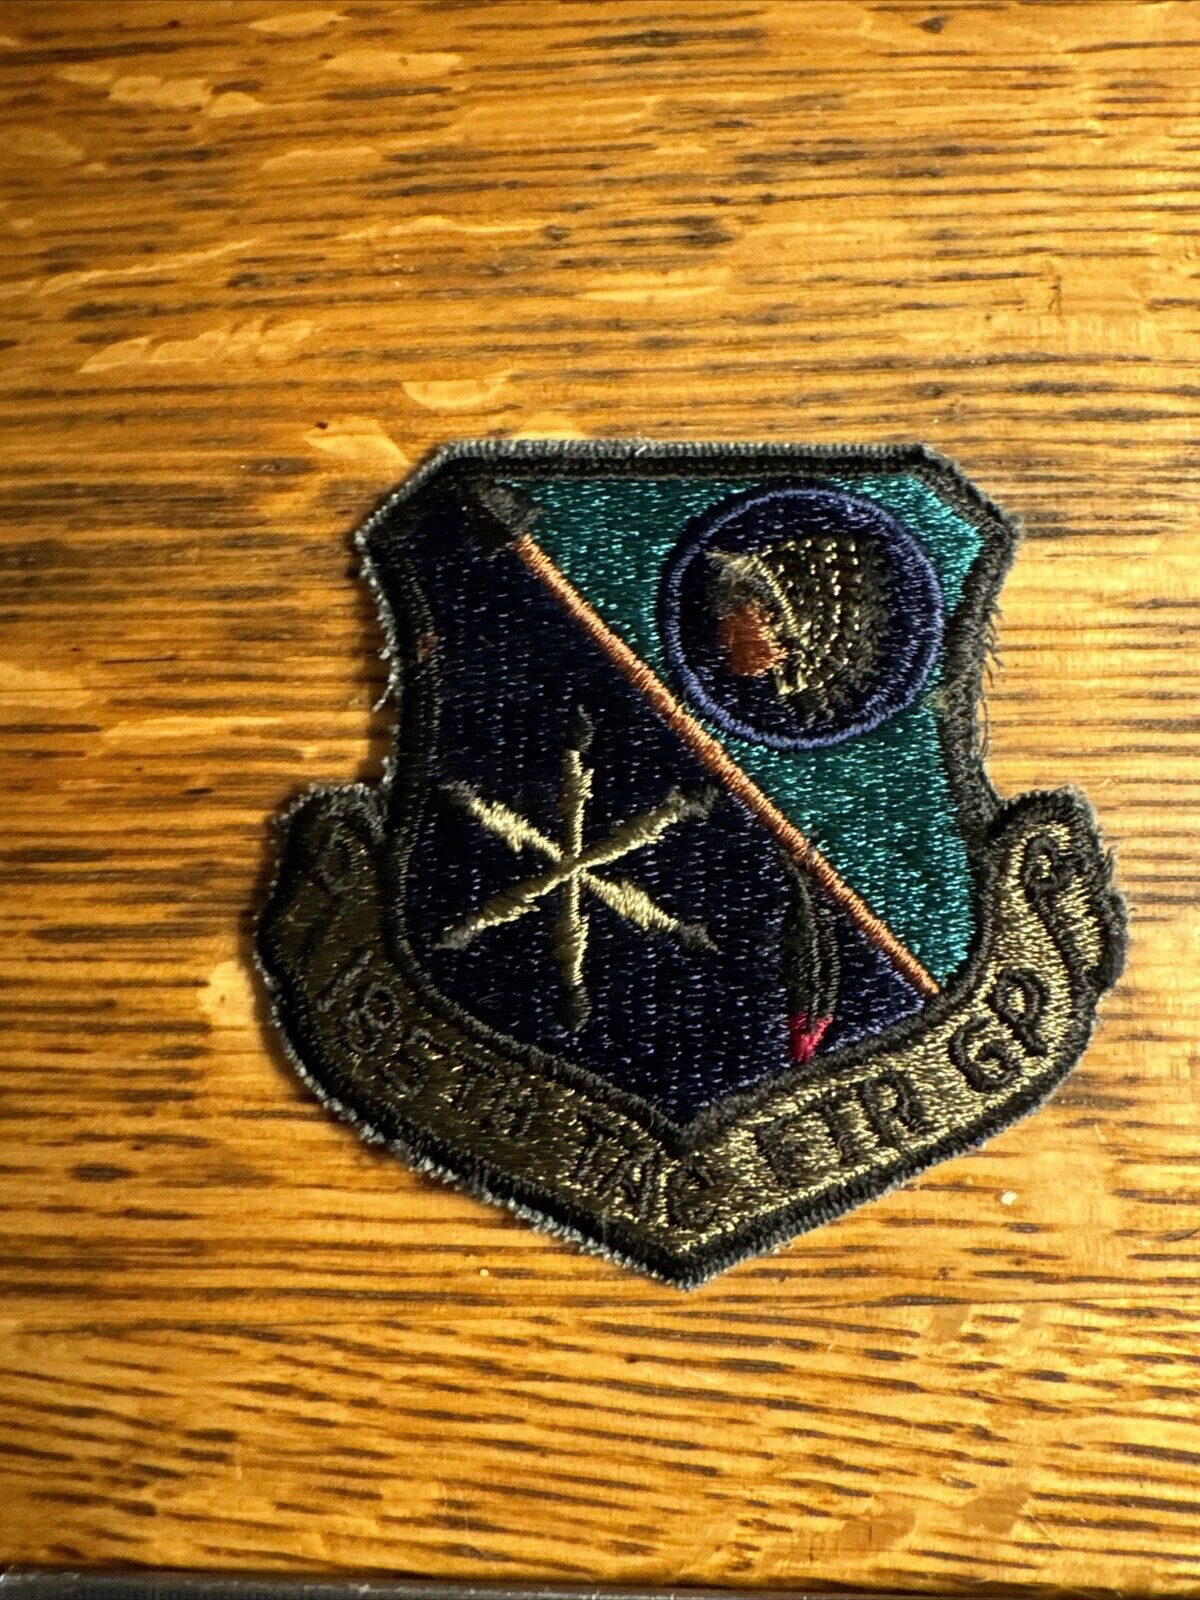 Original USAF 185TH TACTICAL FIGHTER GROUP Arm Patch . A